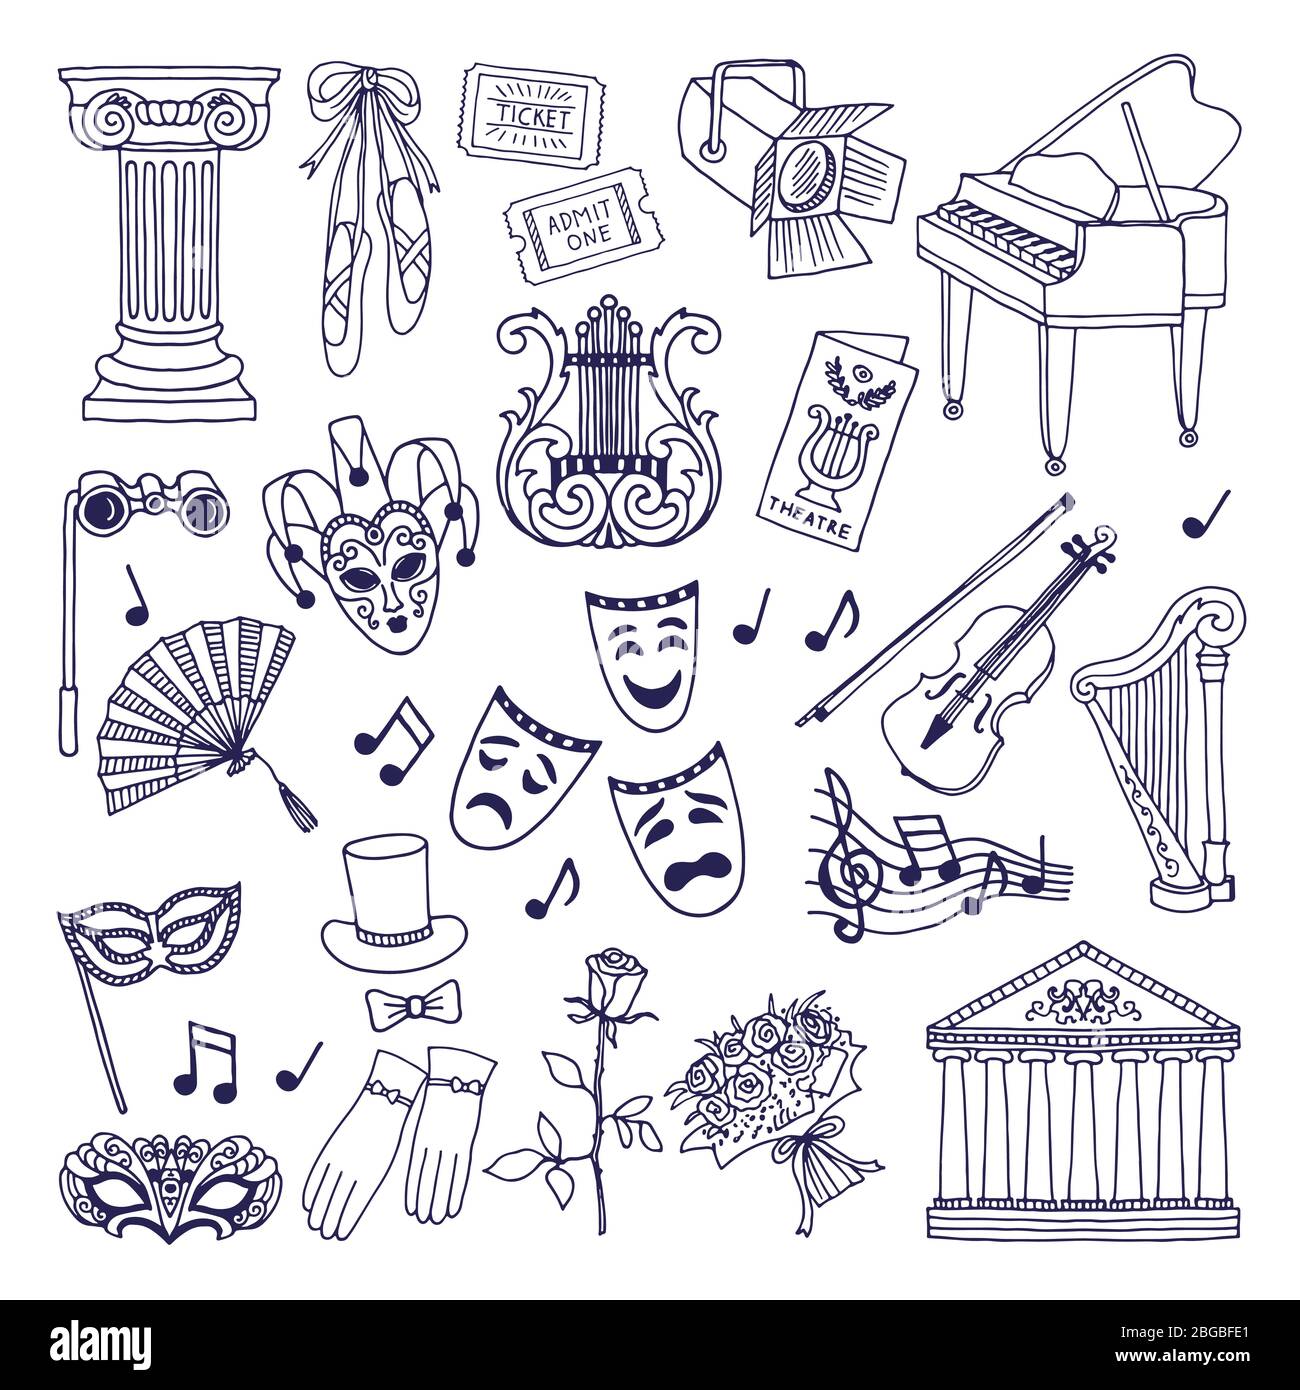 Theatre illustrations set. Opera and ballet vector symbols isolate on white Stock Vector